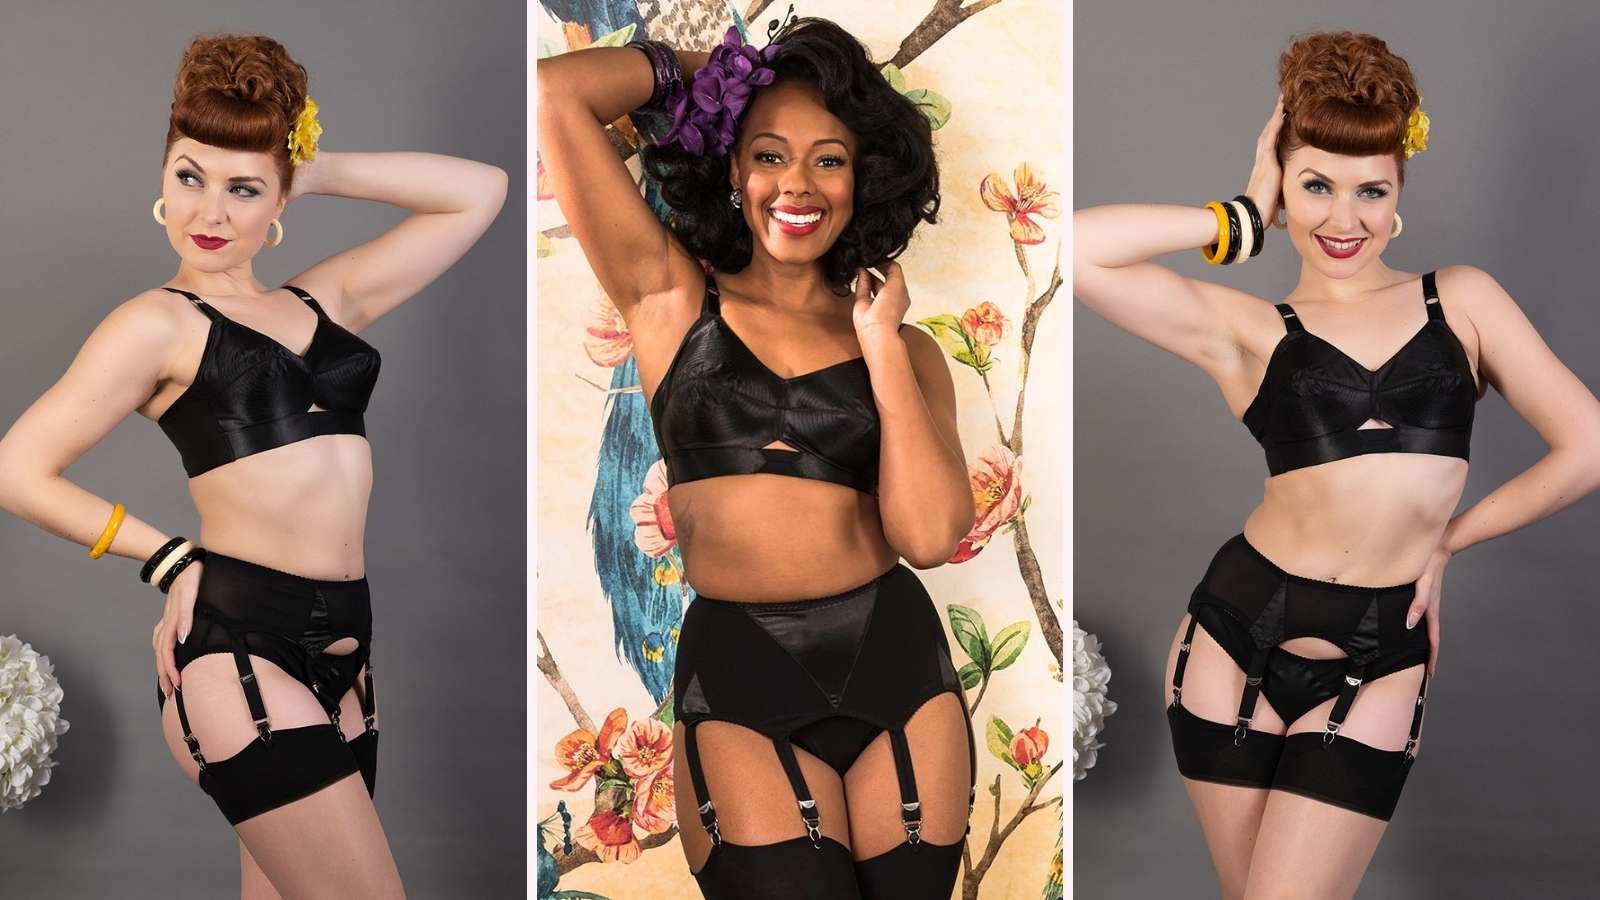 Our exclusive 1950s Black Satin Lingerie collection is a perfect tribute to the glamorous pinup models of the 1950s.